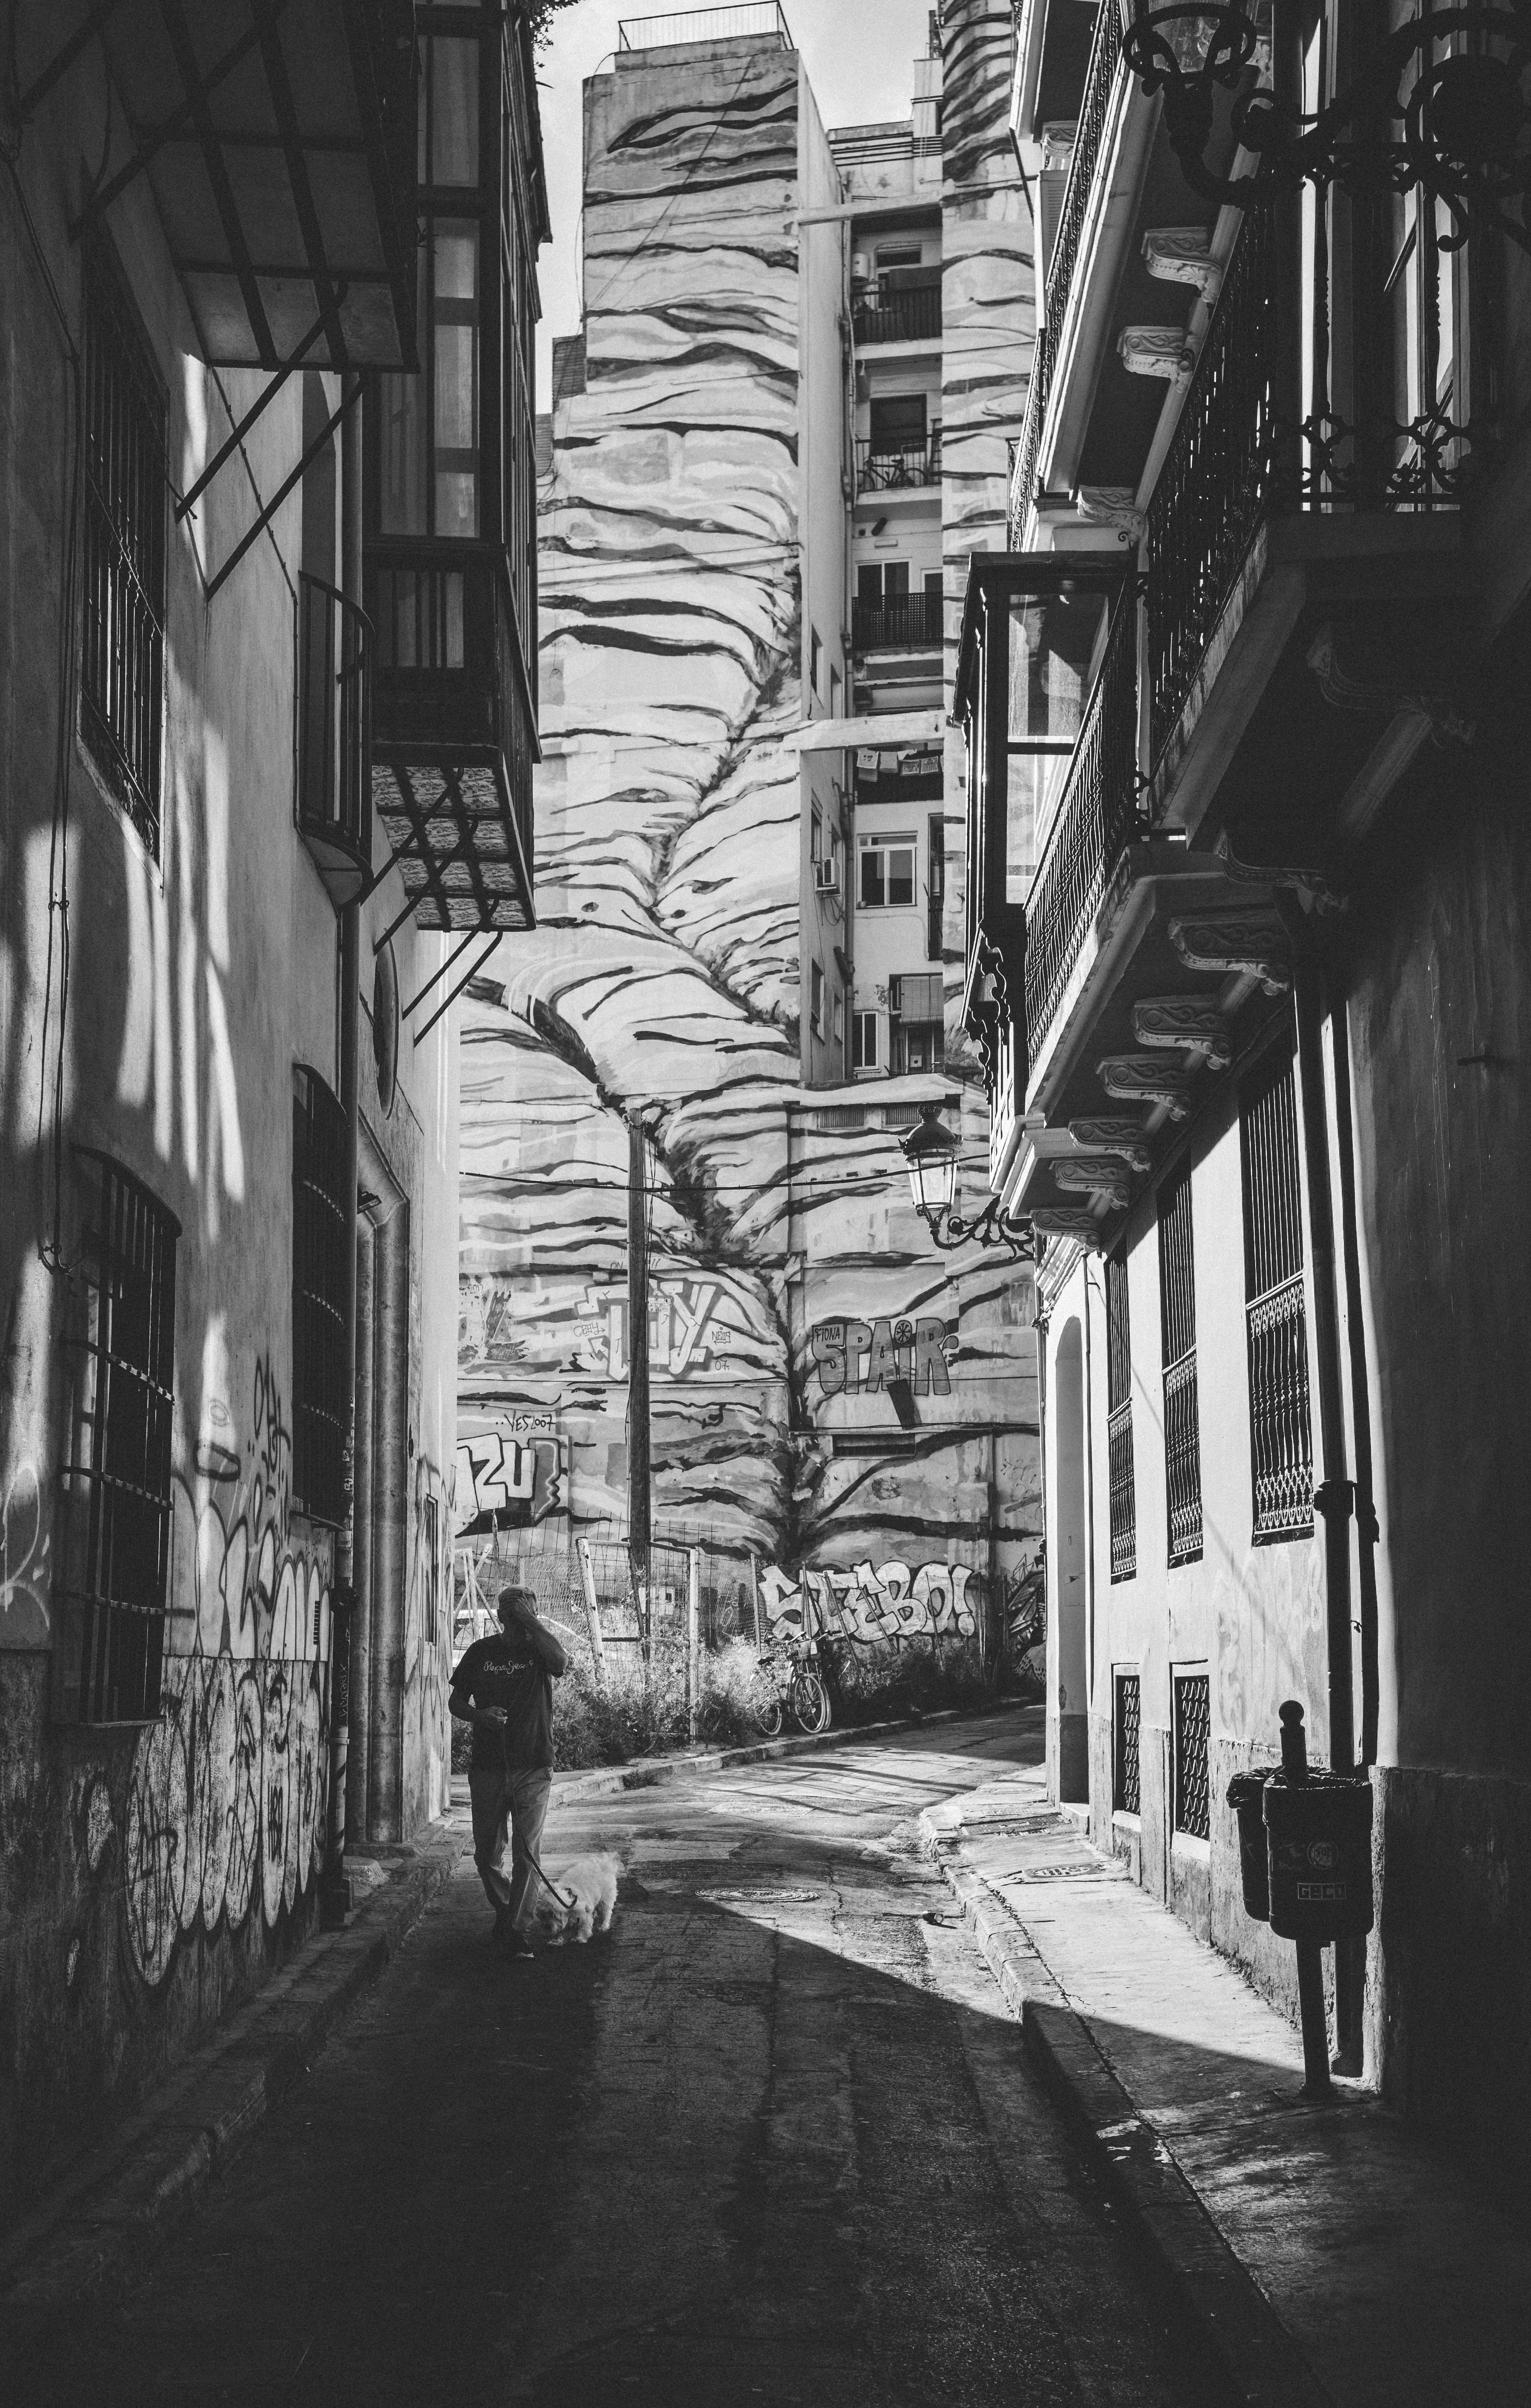 grayscale photography of person walking, urban, road, street